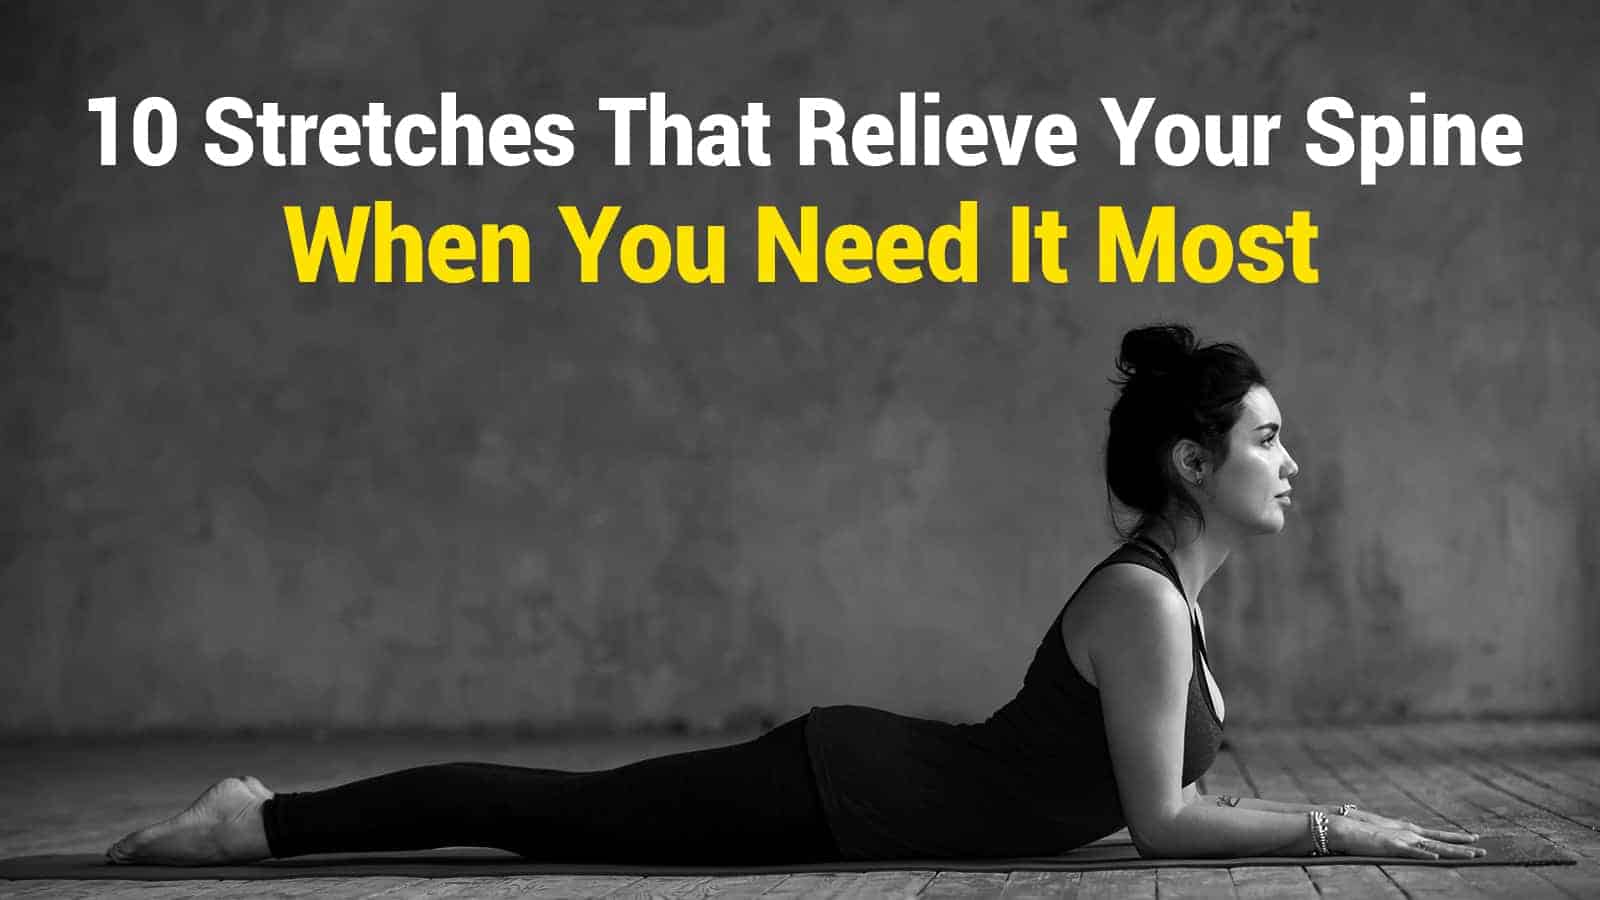 10 Stretches That Relieve Your Spine When You Need It Most